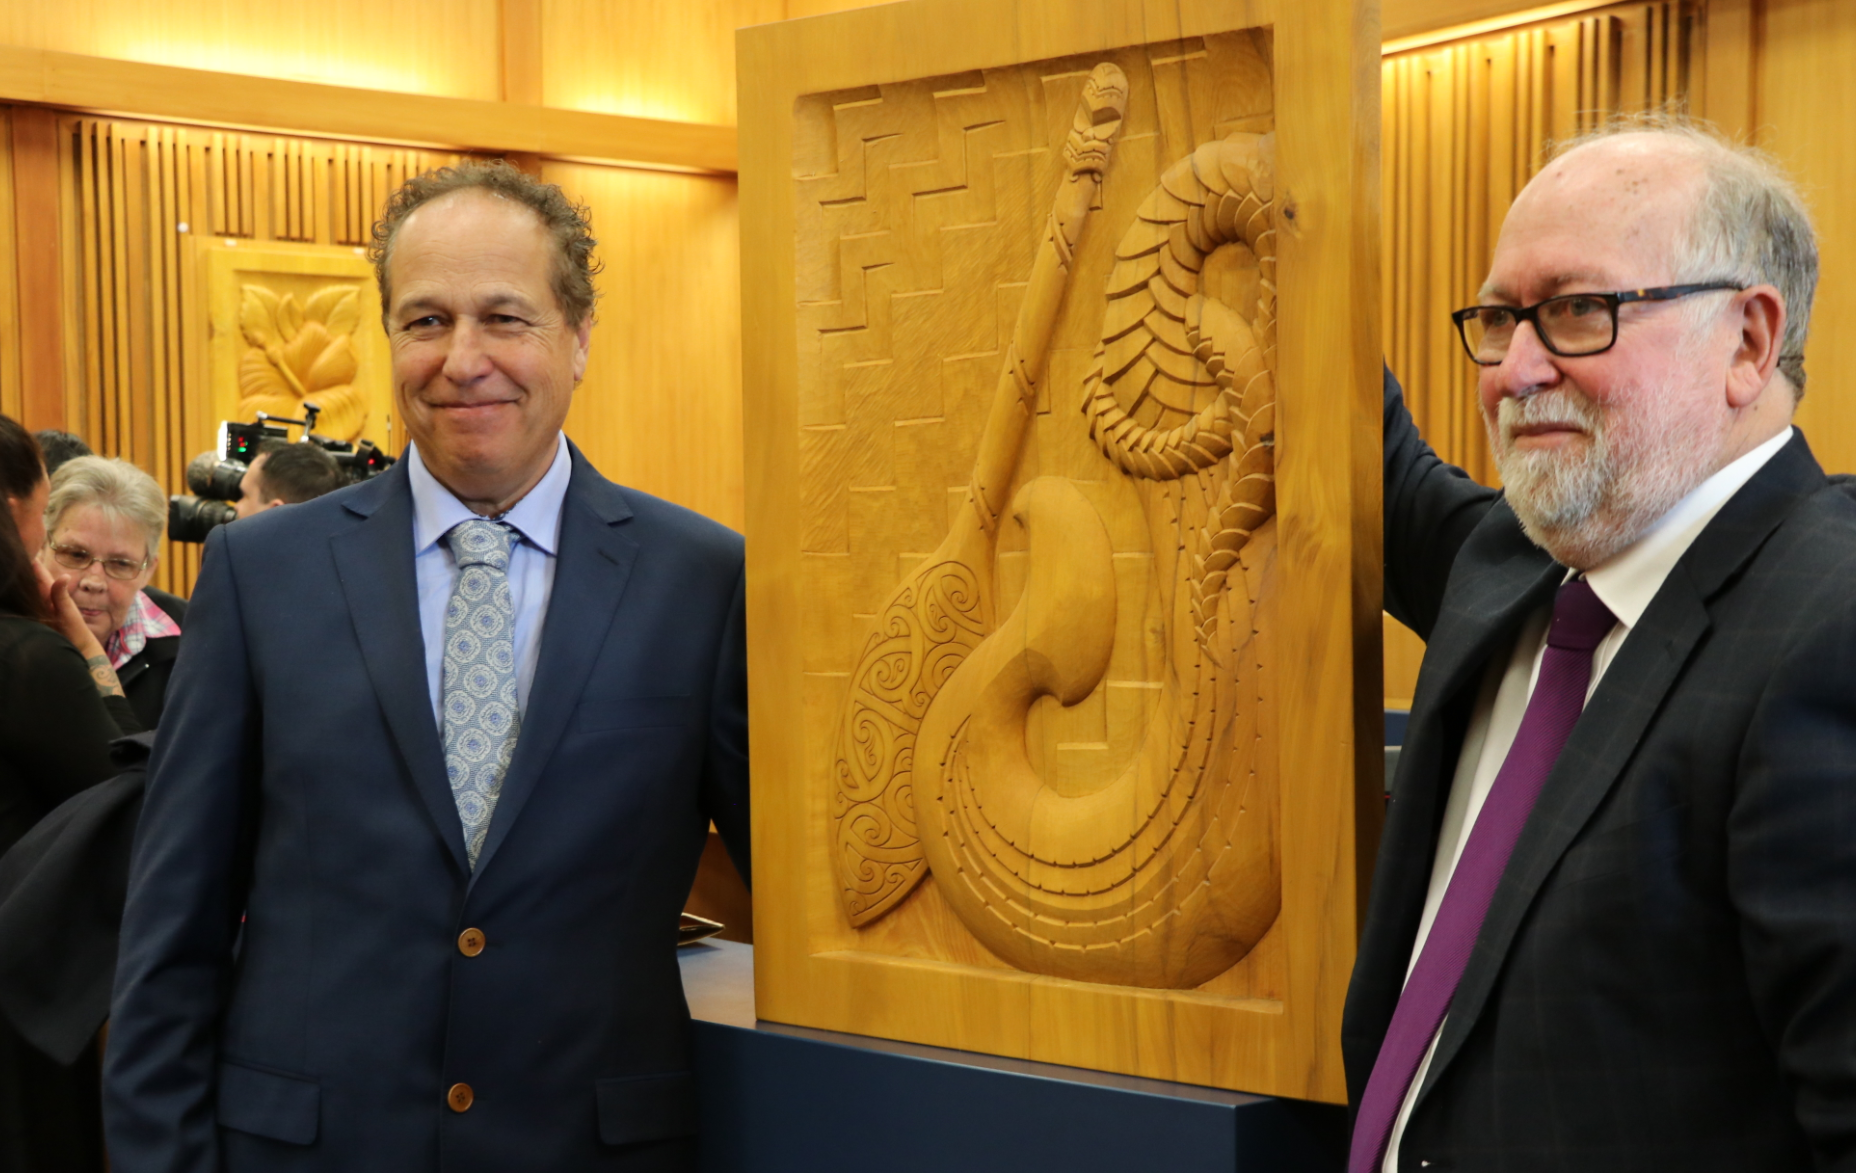 Local carver Hermann Salzmann and Judge Walker holding panel carved in honour of Judge Walker and his association with the Porirua District Court community.